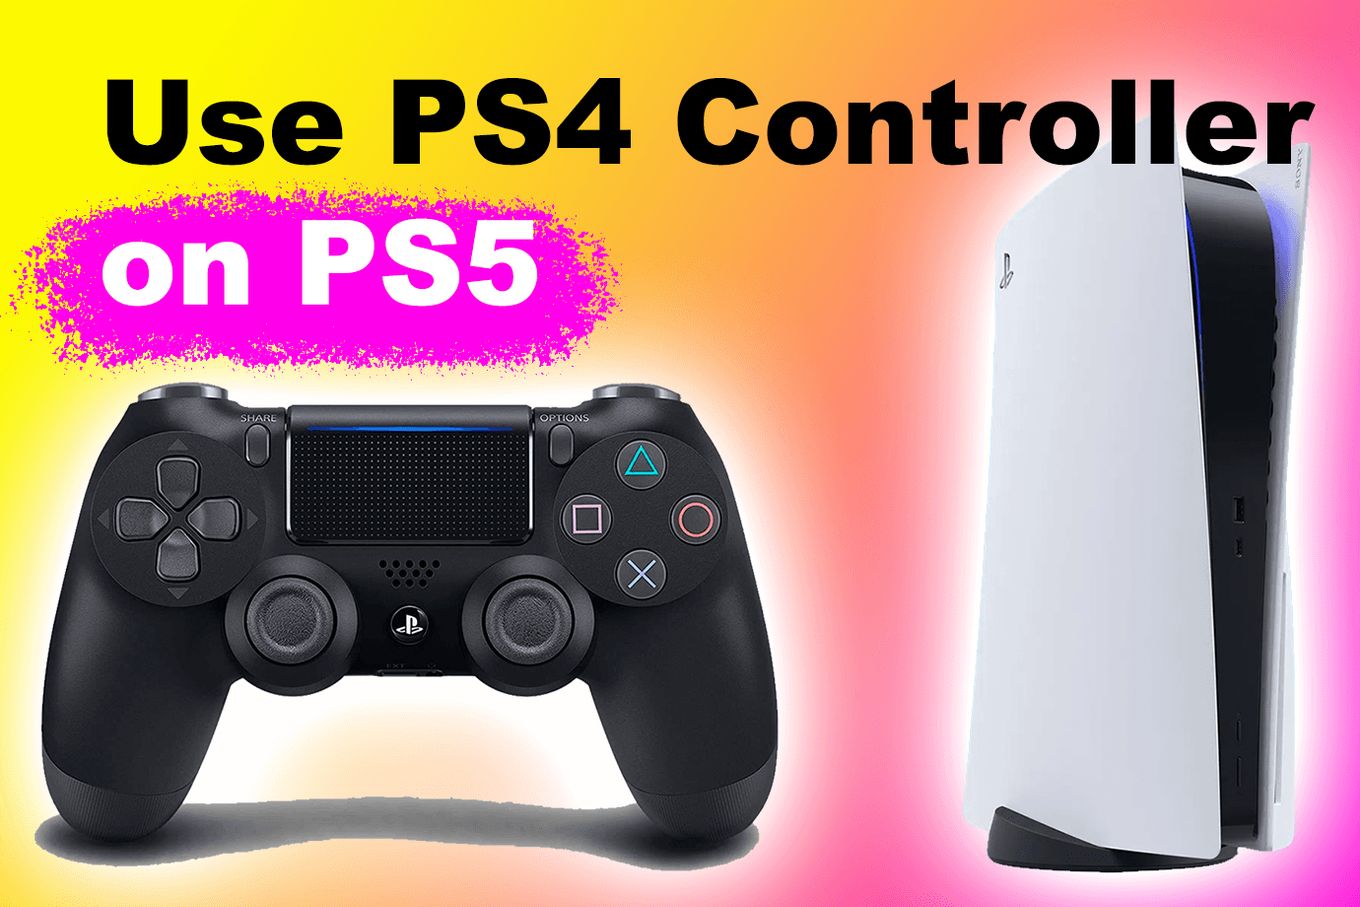 How to connect PS5 controller to PS4 console